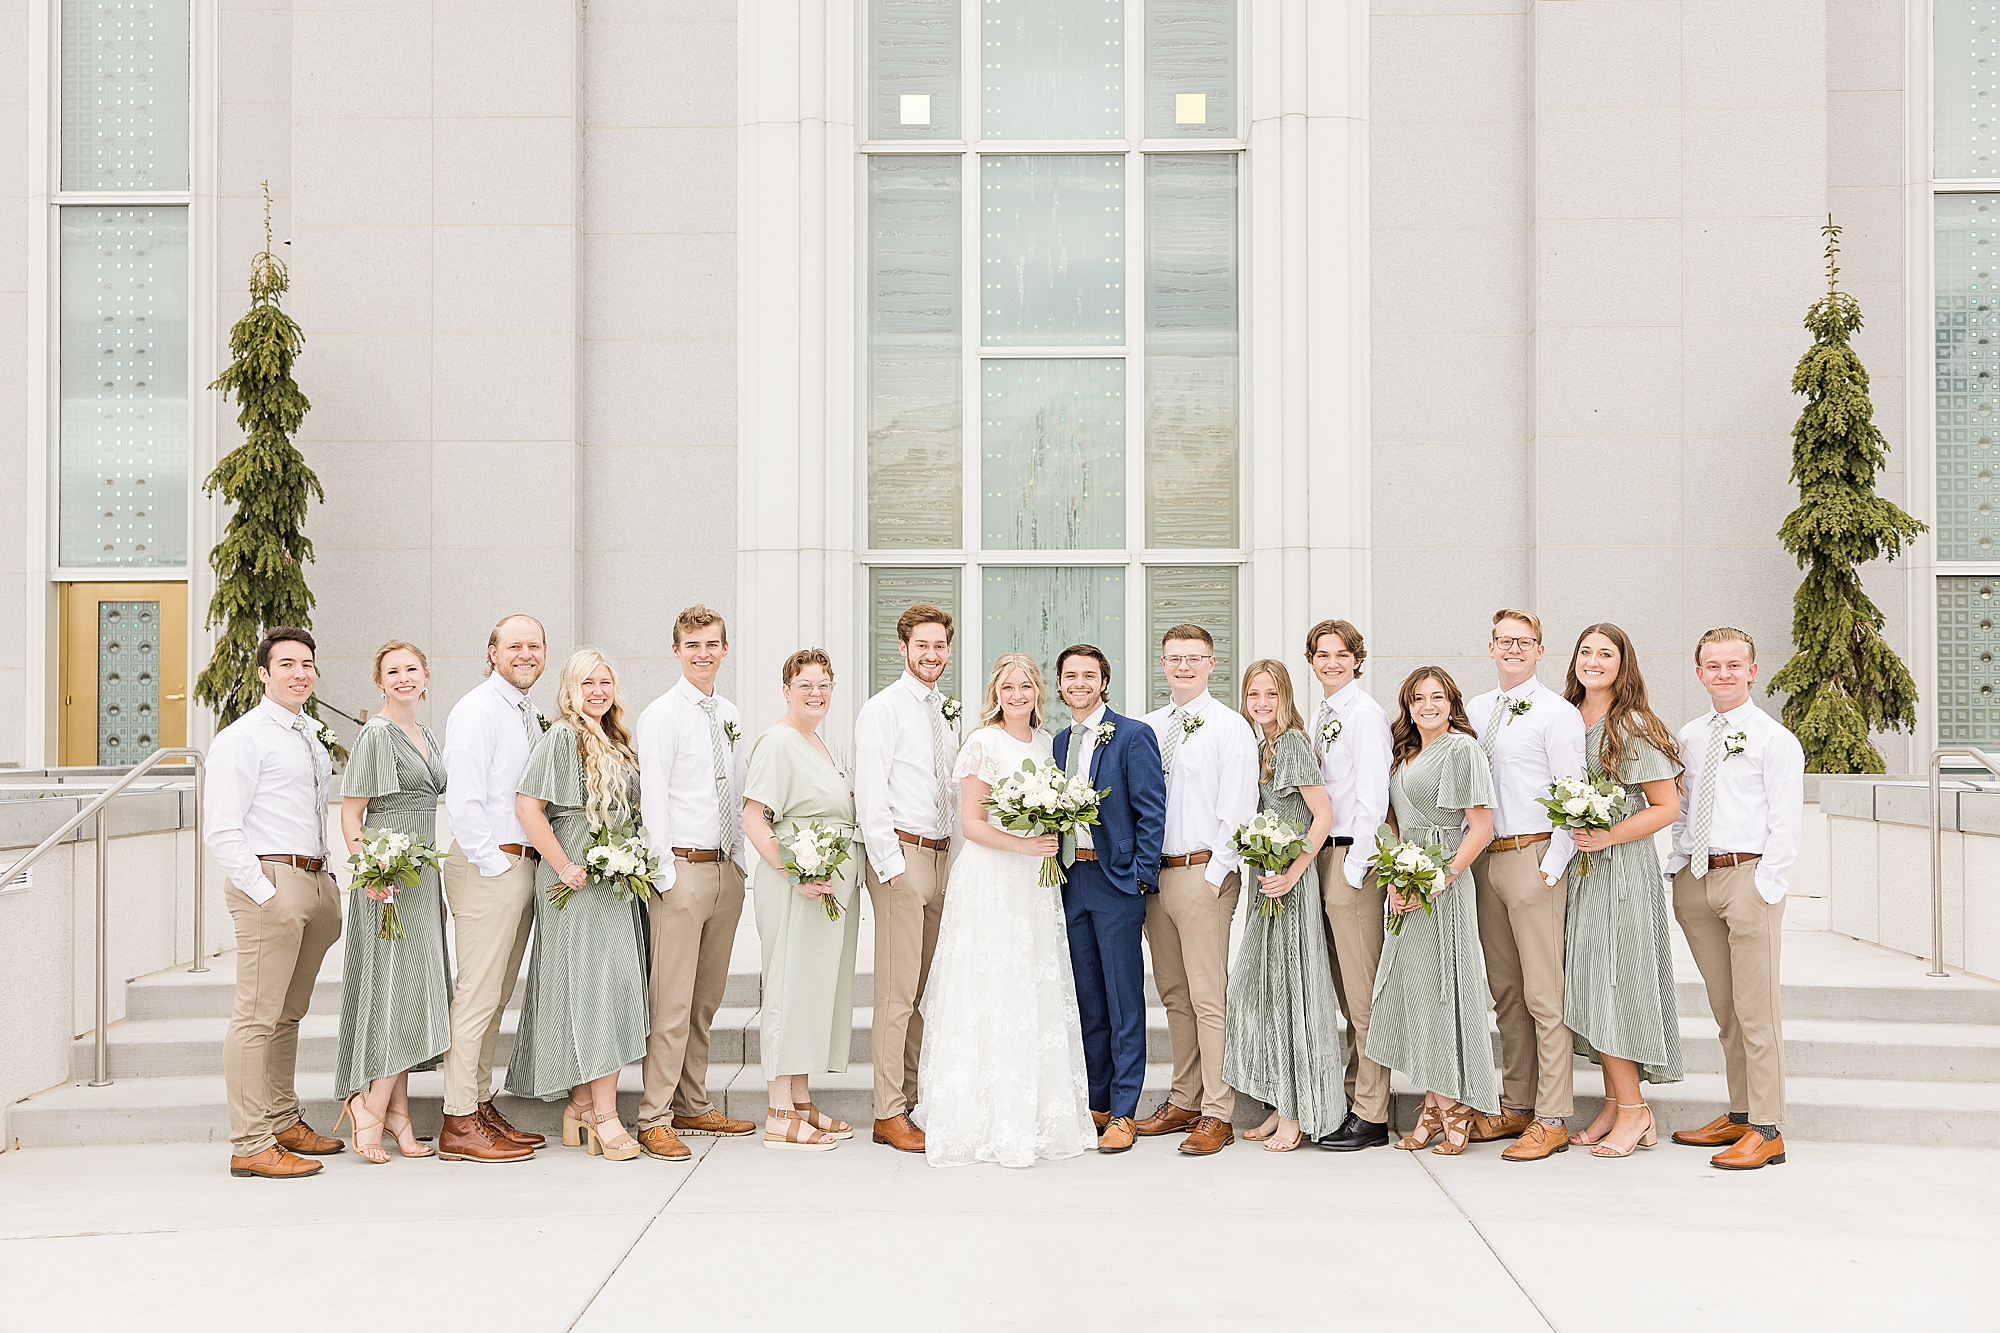 Bridal Party for a wedding at the Knot and Pine